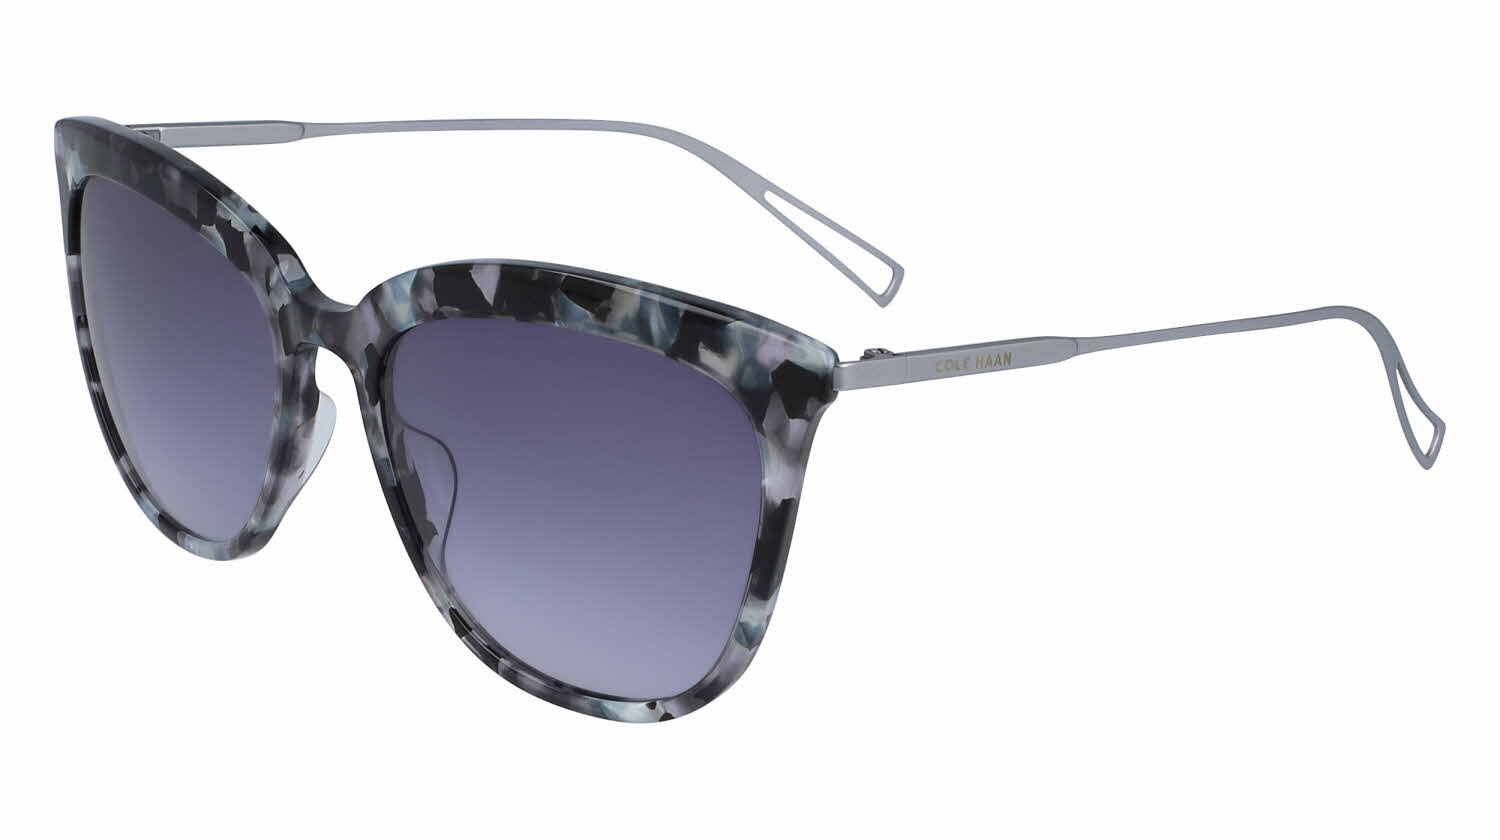 Cole Haan CH7079 Sunglasses